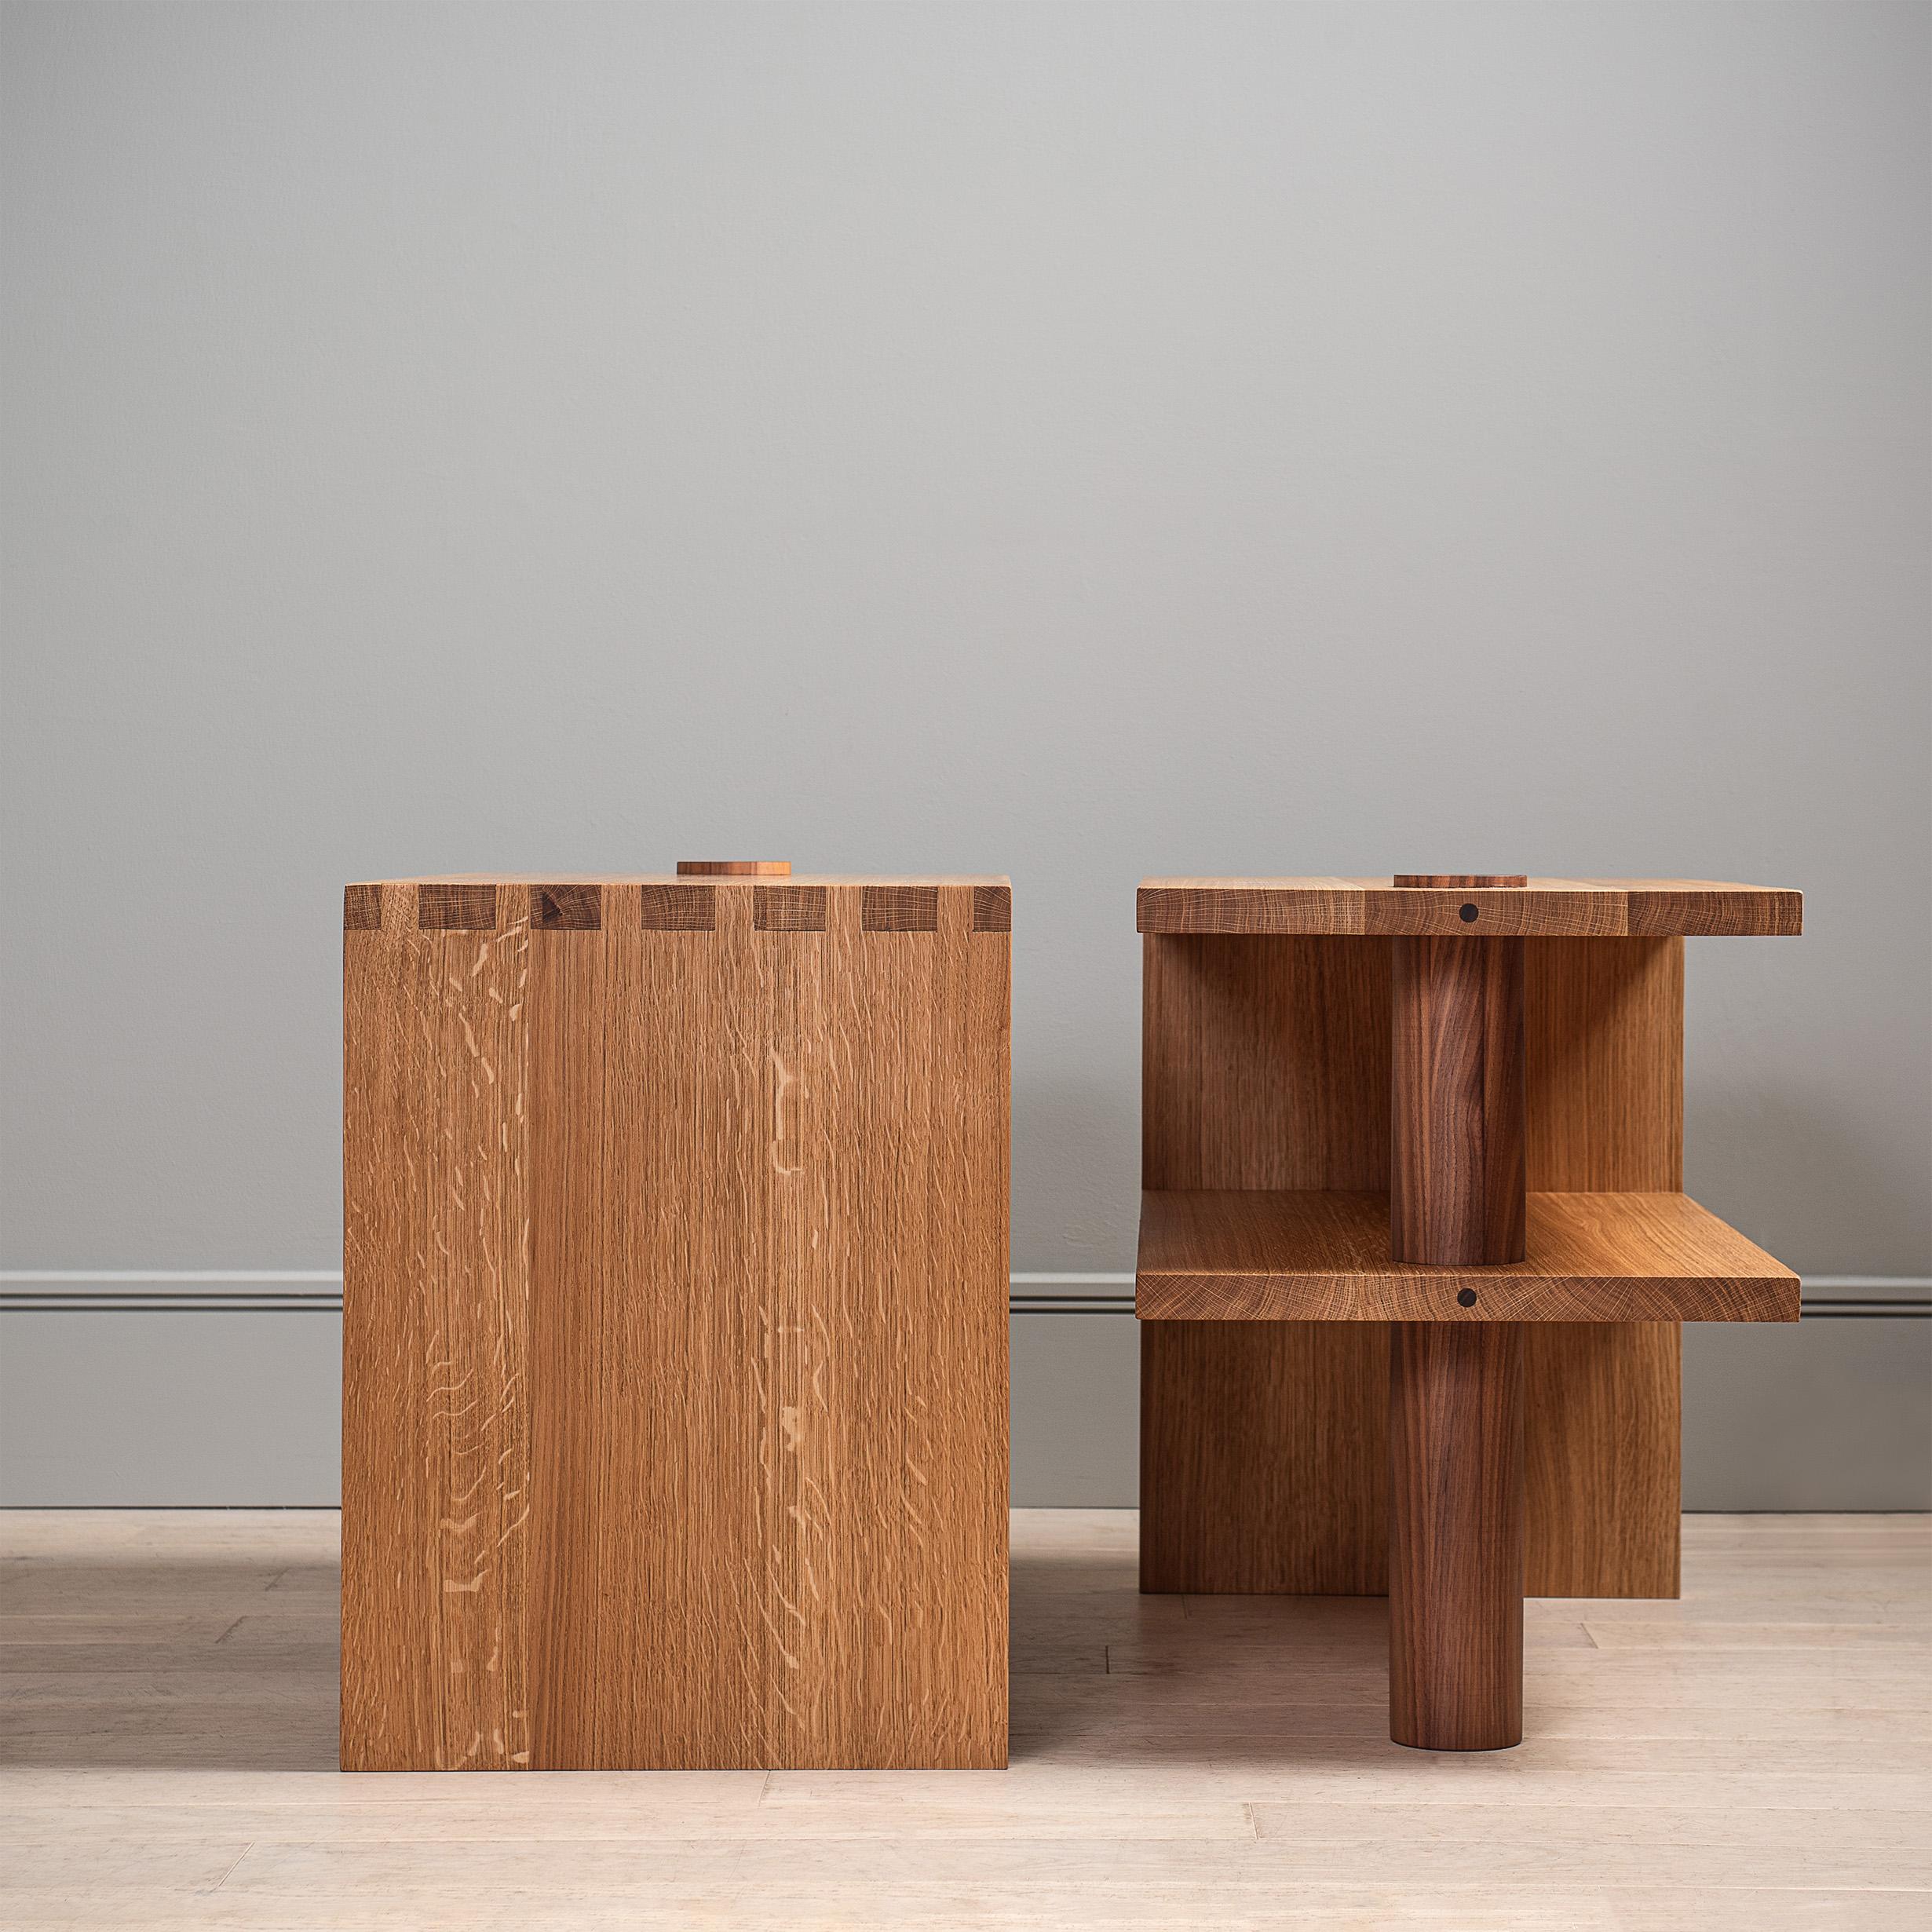 An alternative monumental version of our architectural Post-Modern oak & walnut pillar table/nightstands. Designed and handcrafted in England using traditional furniture and cabinetry techniques from fully quarter-sawn English Oak and American Black